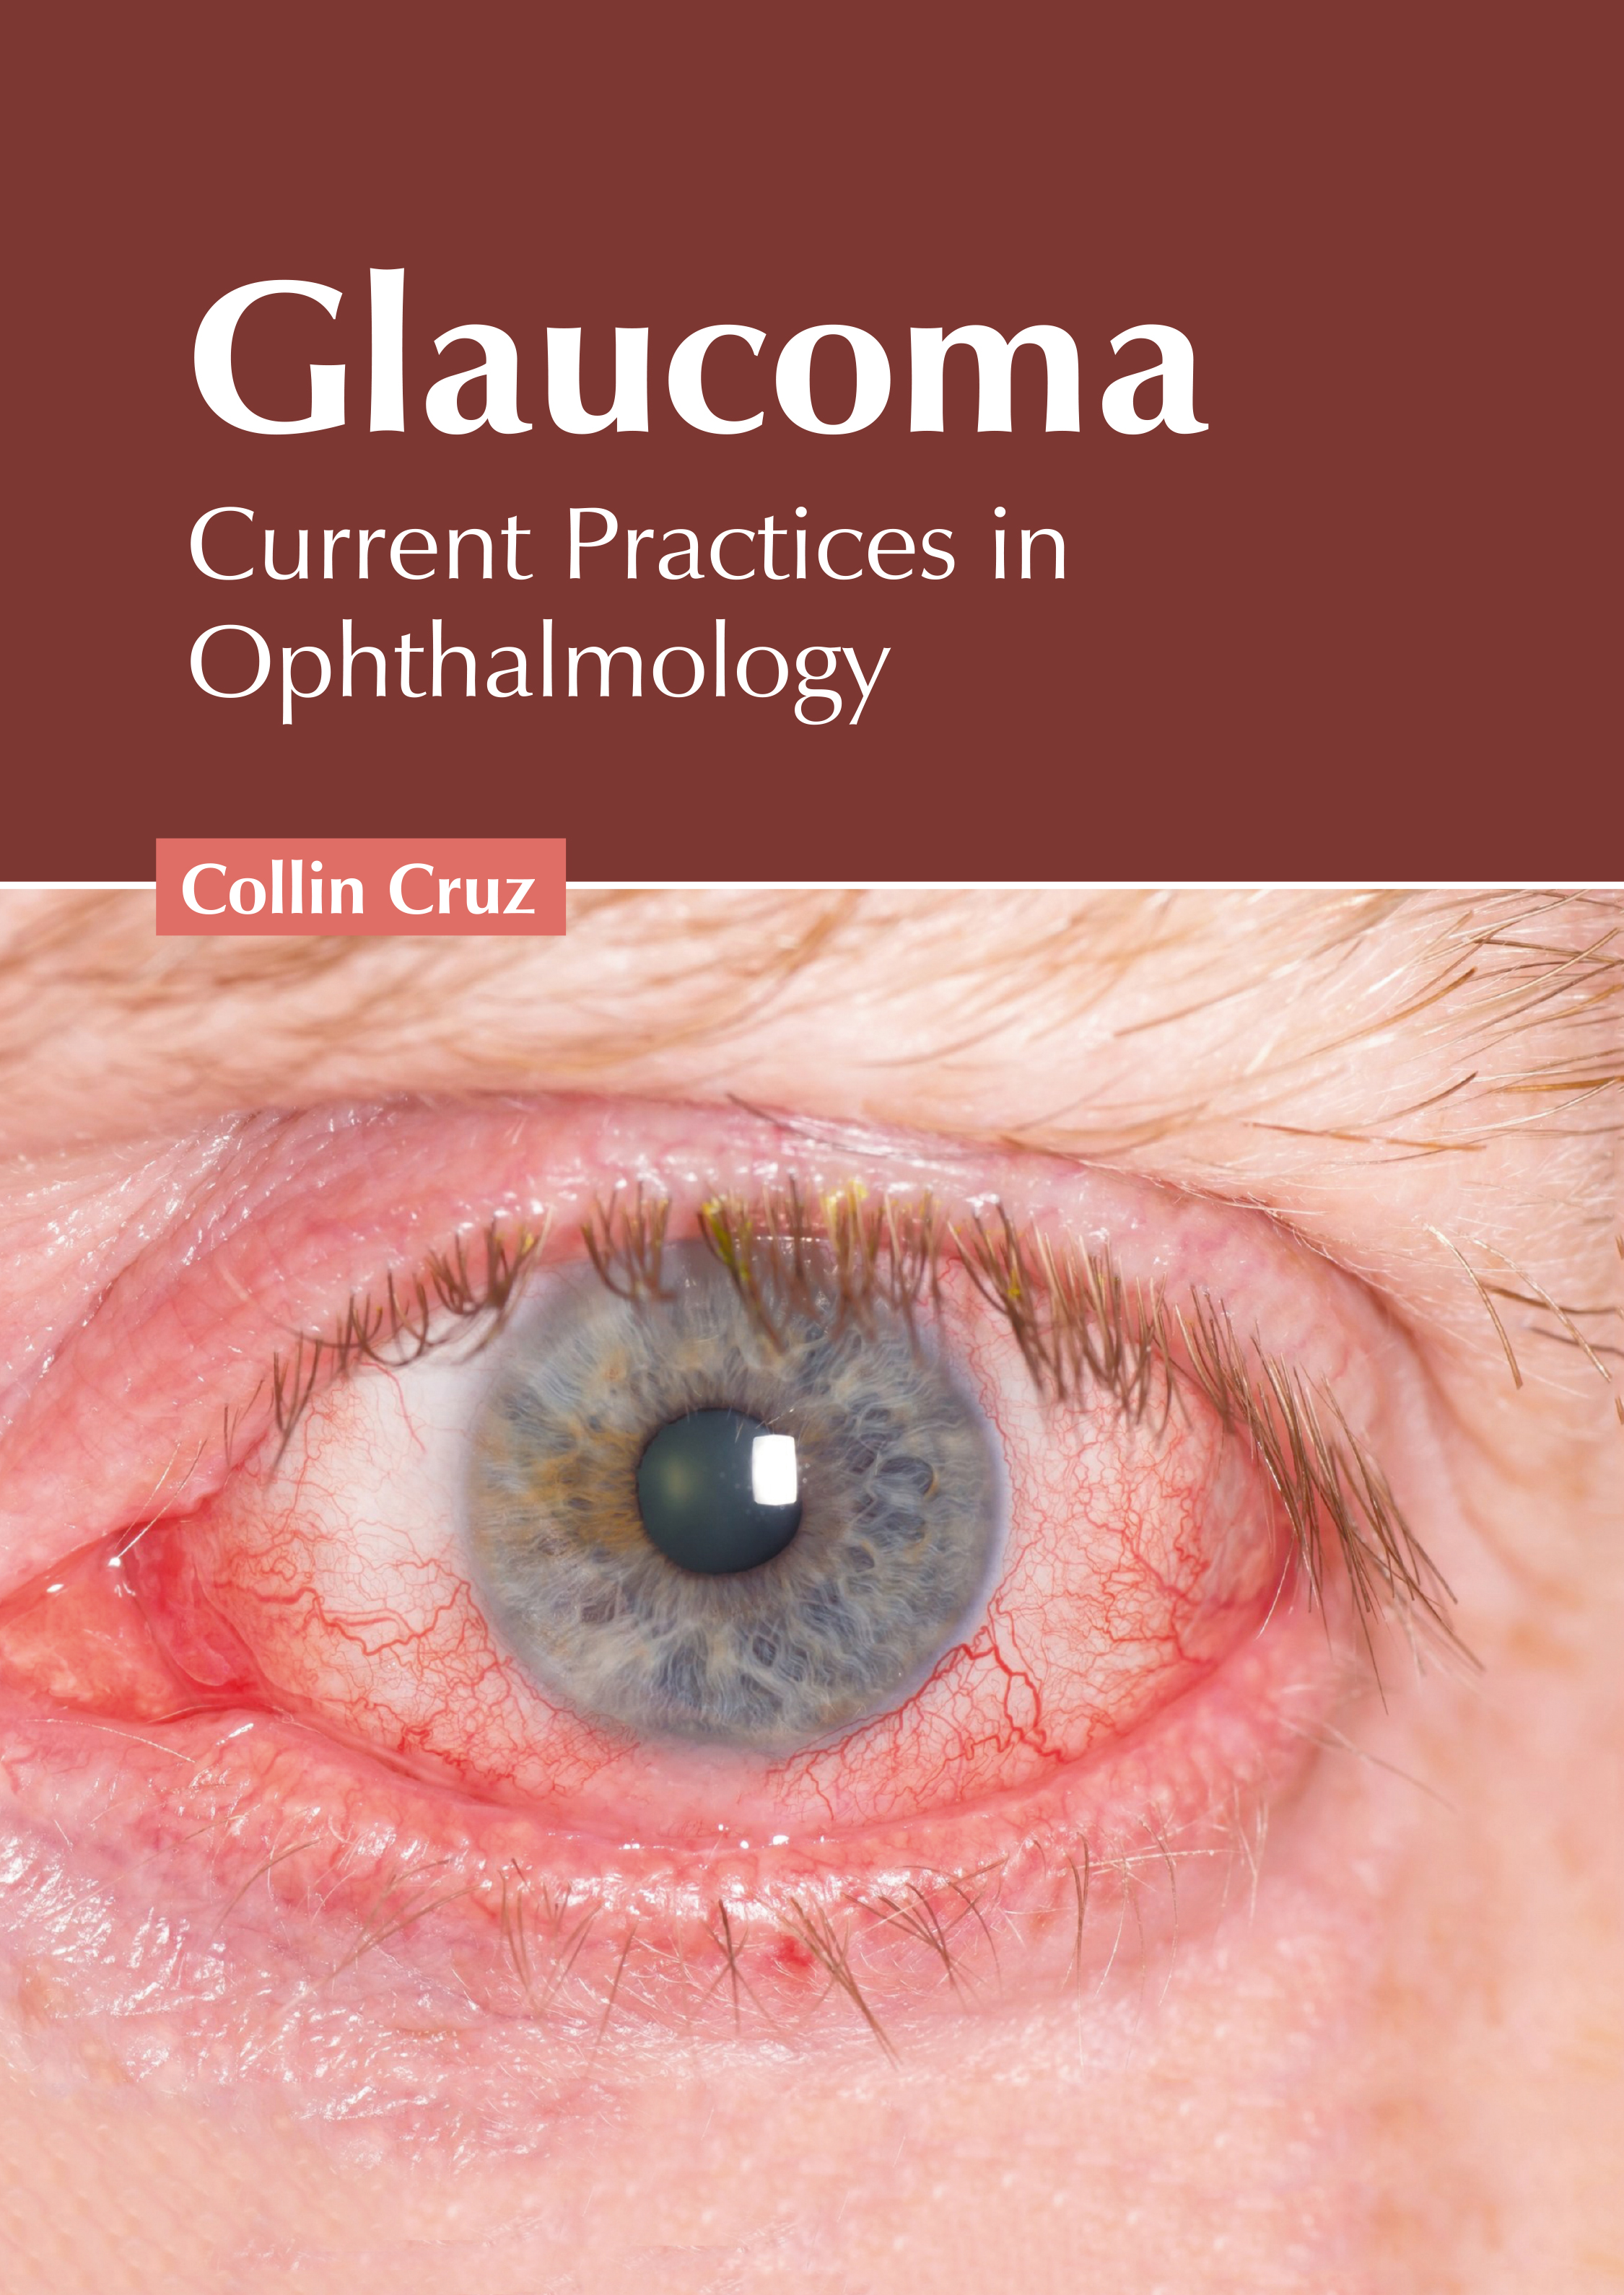 

exclusive-publishers/american-medical-publishers/glaucoma-current-practices-in-ophthalmology-9781639273850